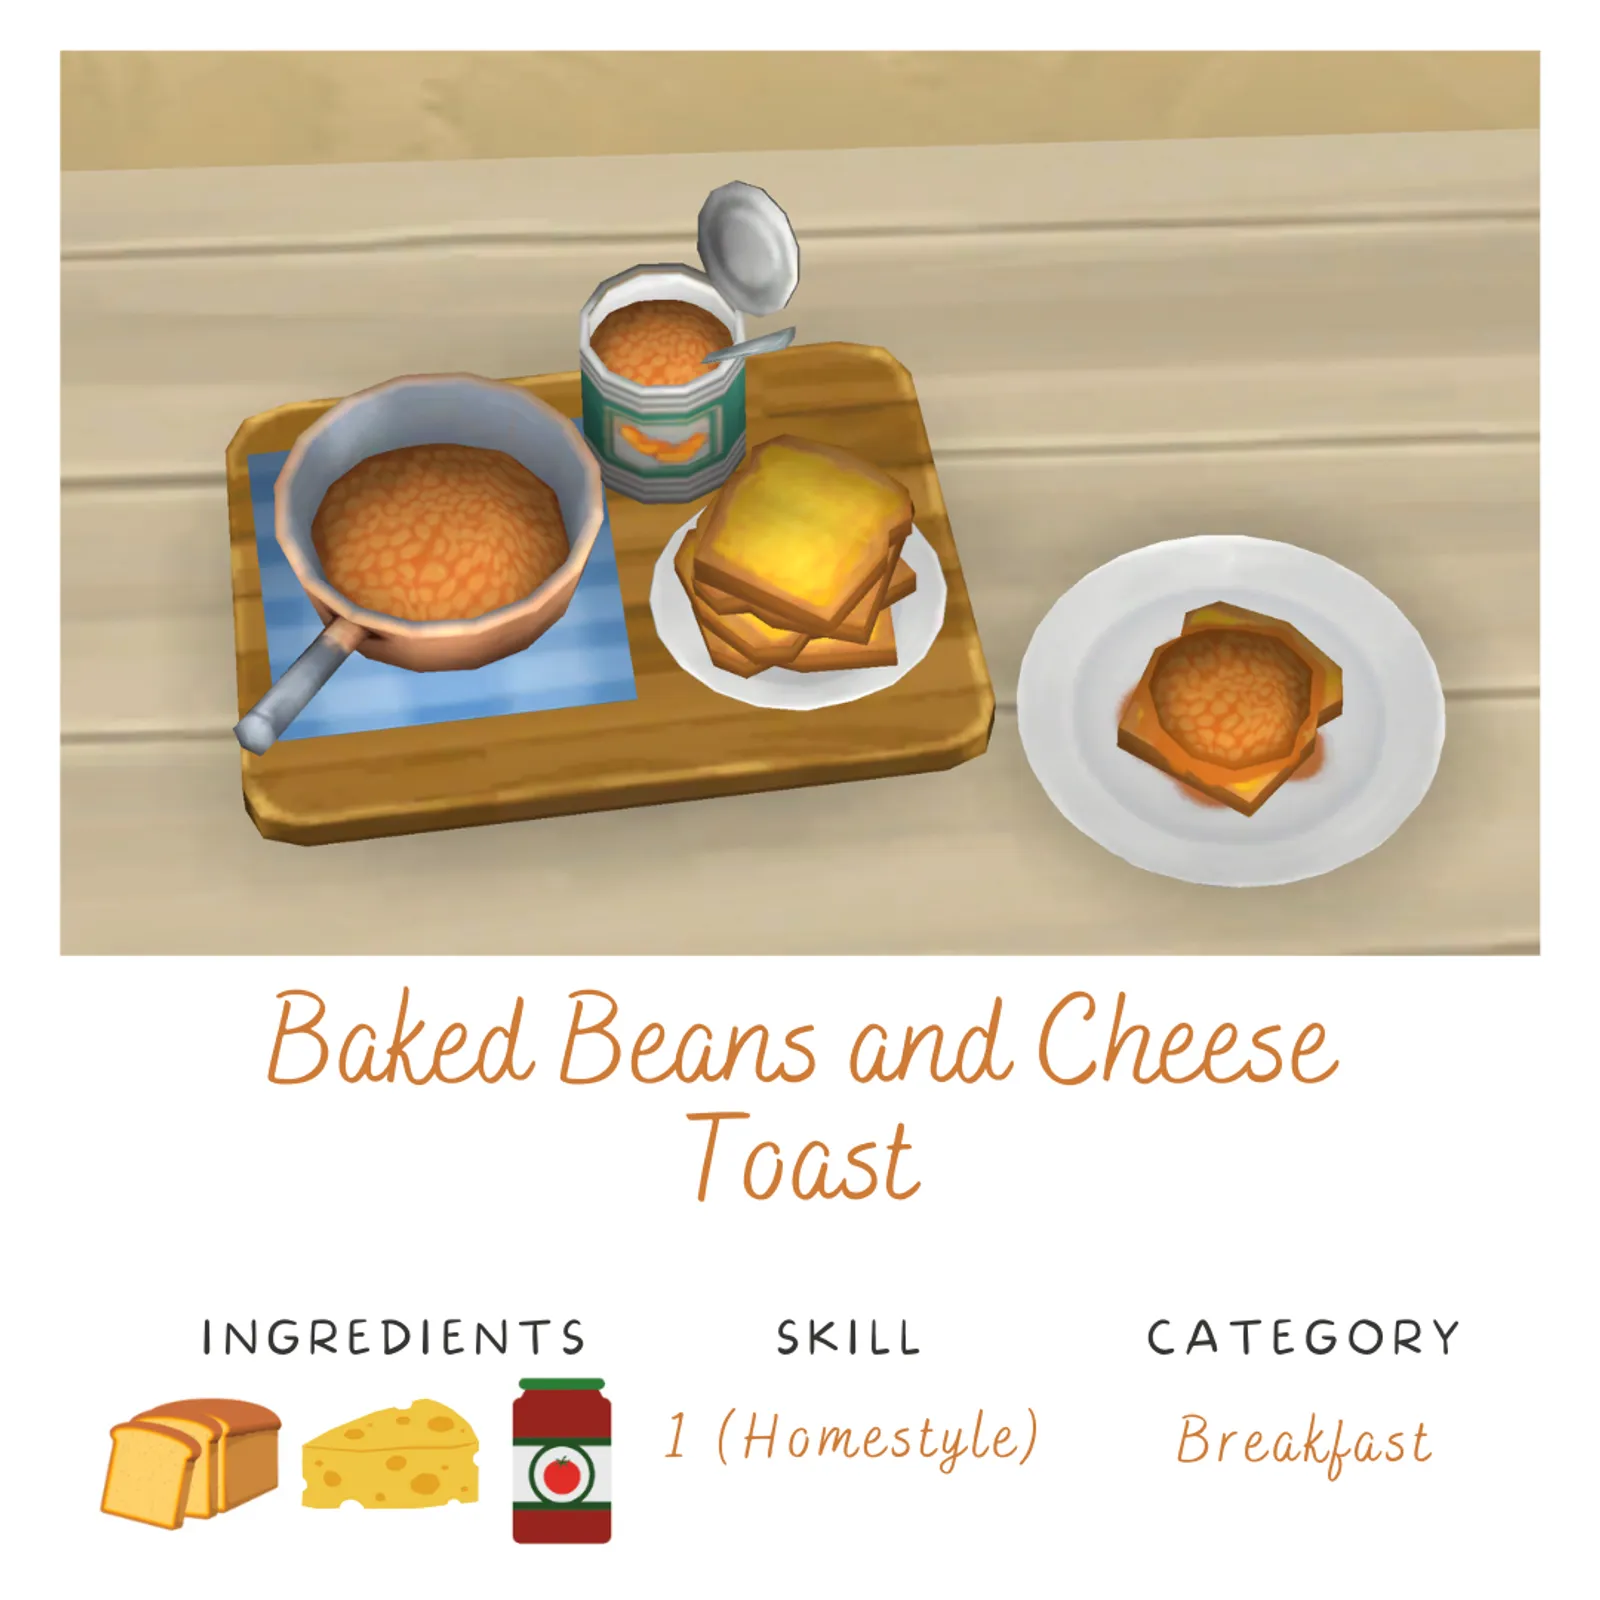 Baked Beans and Cheese Toast